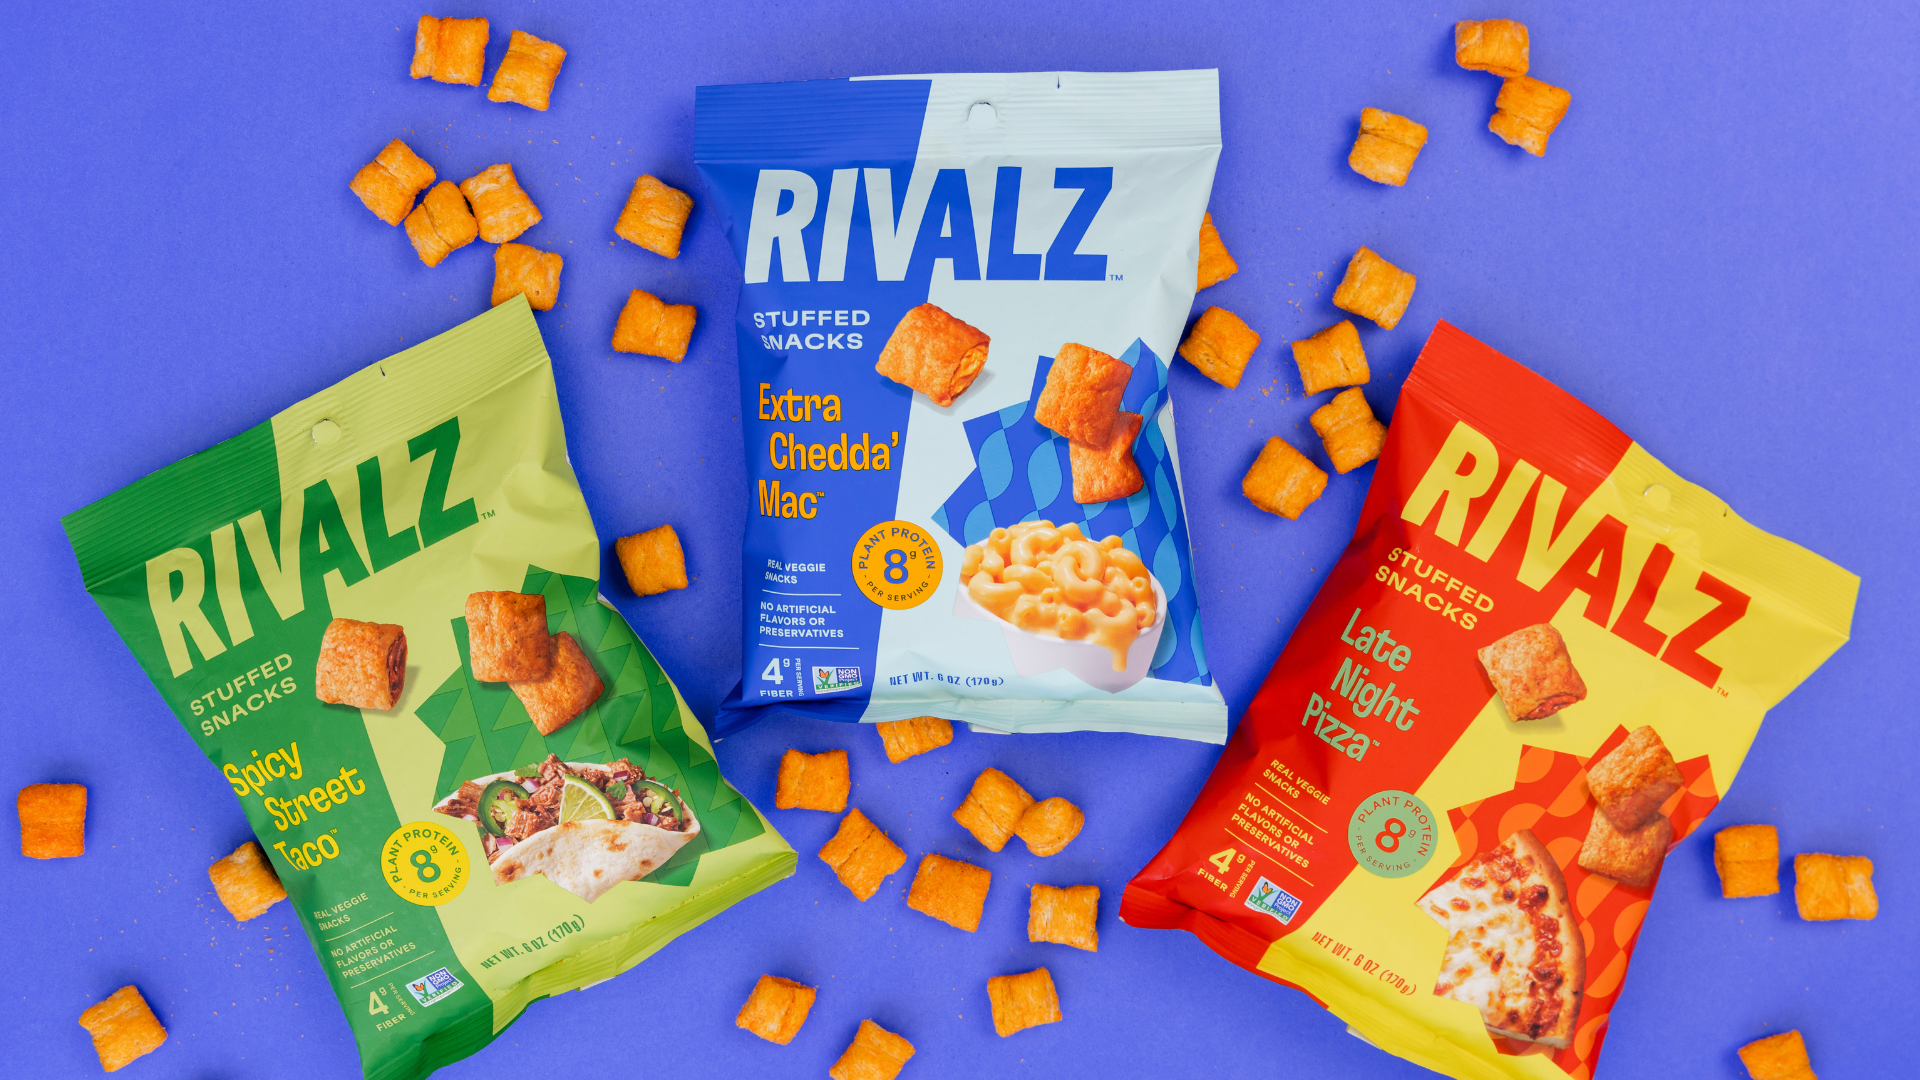 Try Rivalz Snacks. A Vegan, Gluten-free, 8grams of protein and dairy free snack. 